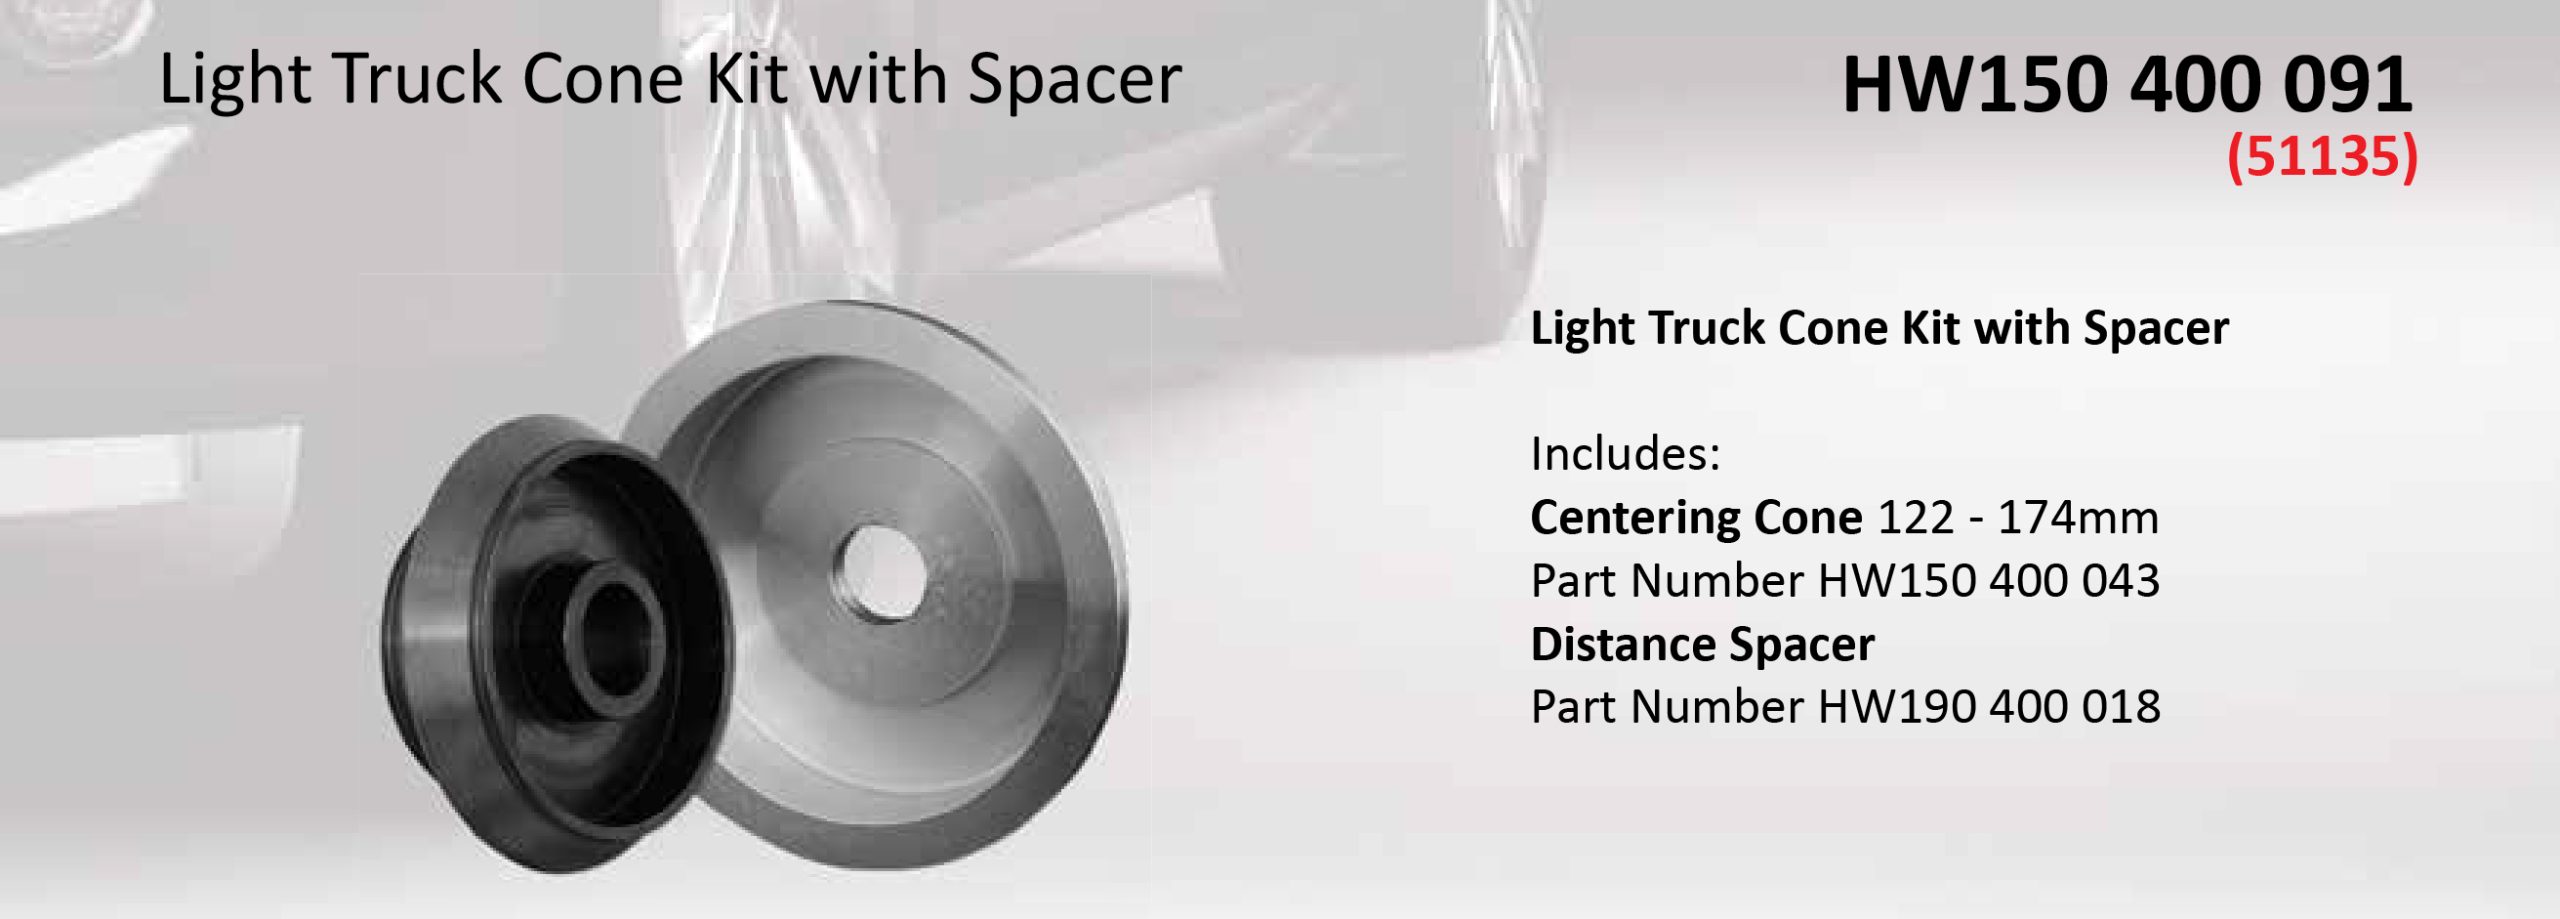 Haweka-Light-truck-cone-and-spacer-kit